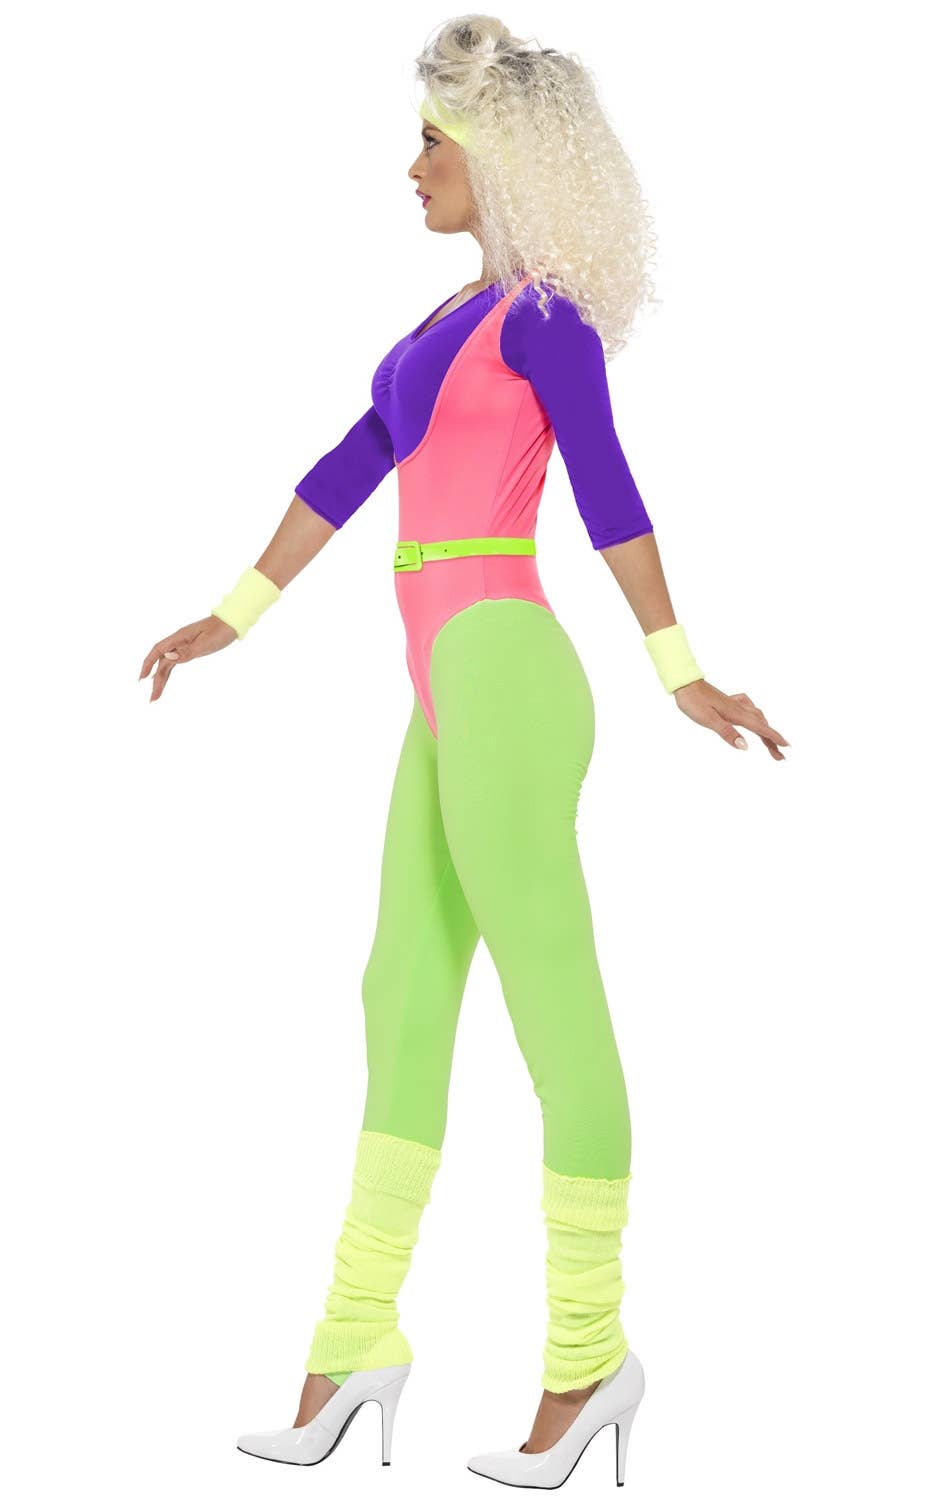 Aerobic Instructor 70s Fashion for Women Costume - Side Image